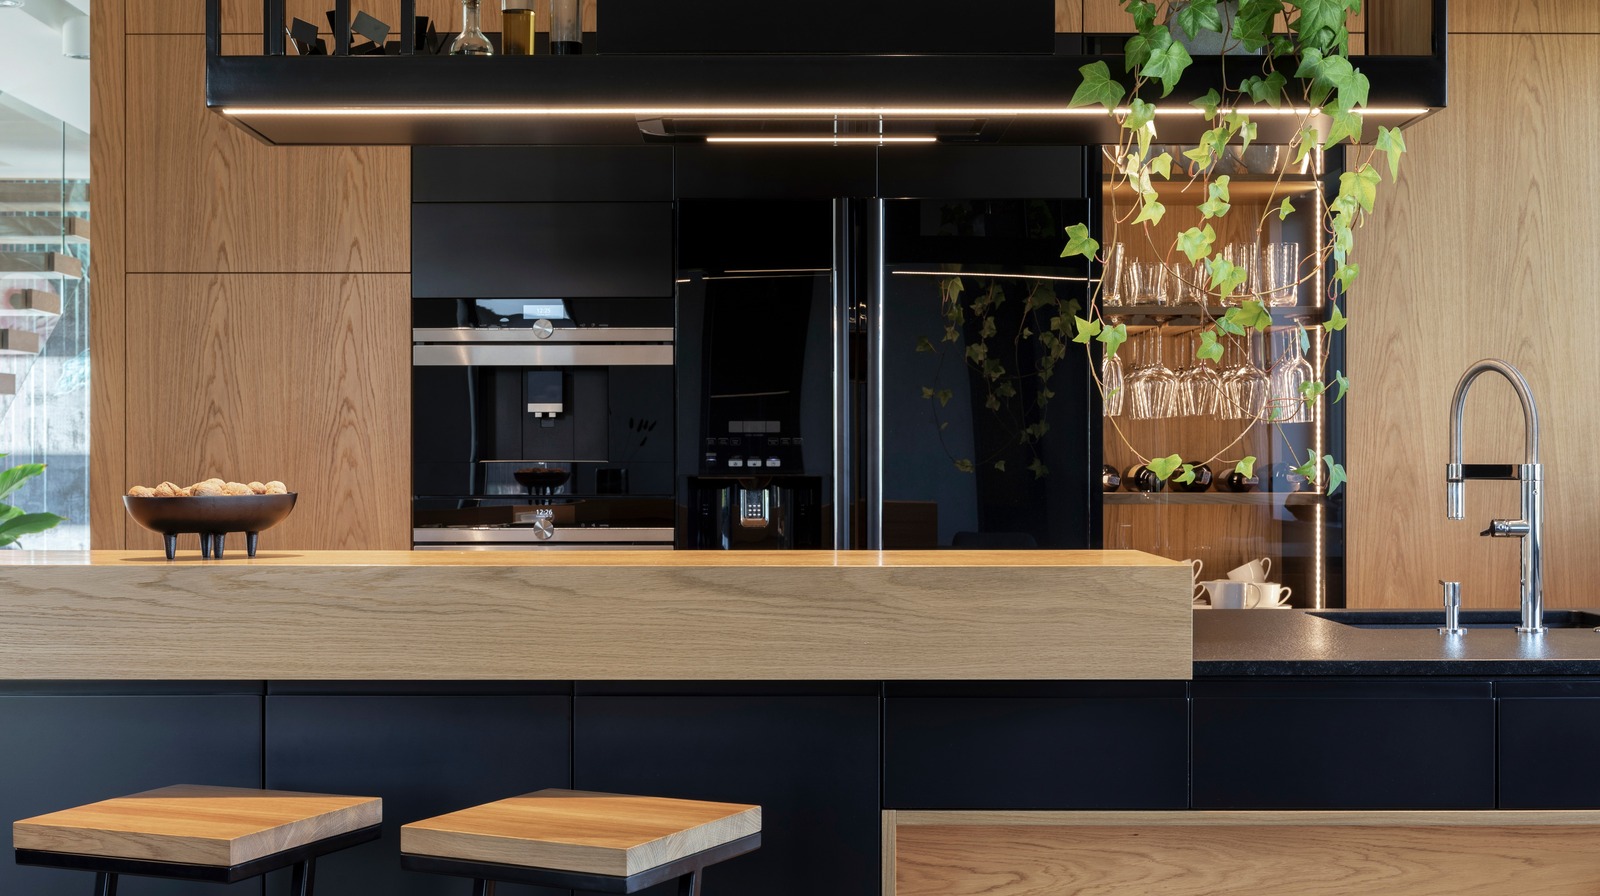 25 Most Popular Kitchen Design Trends For 2023, According To Experts